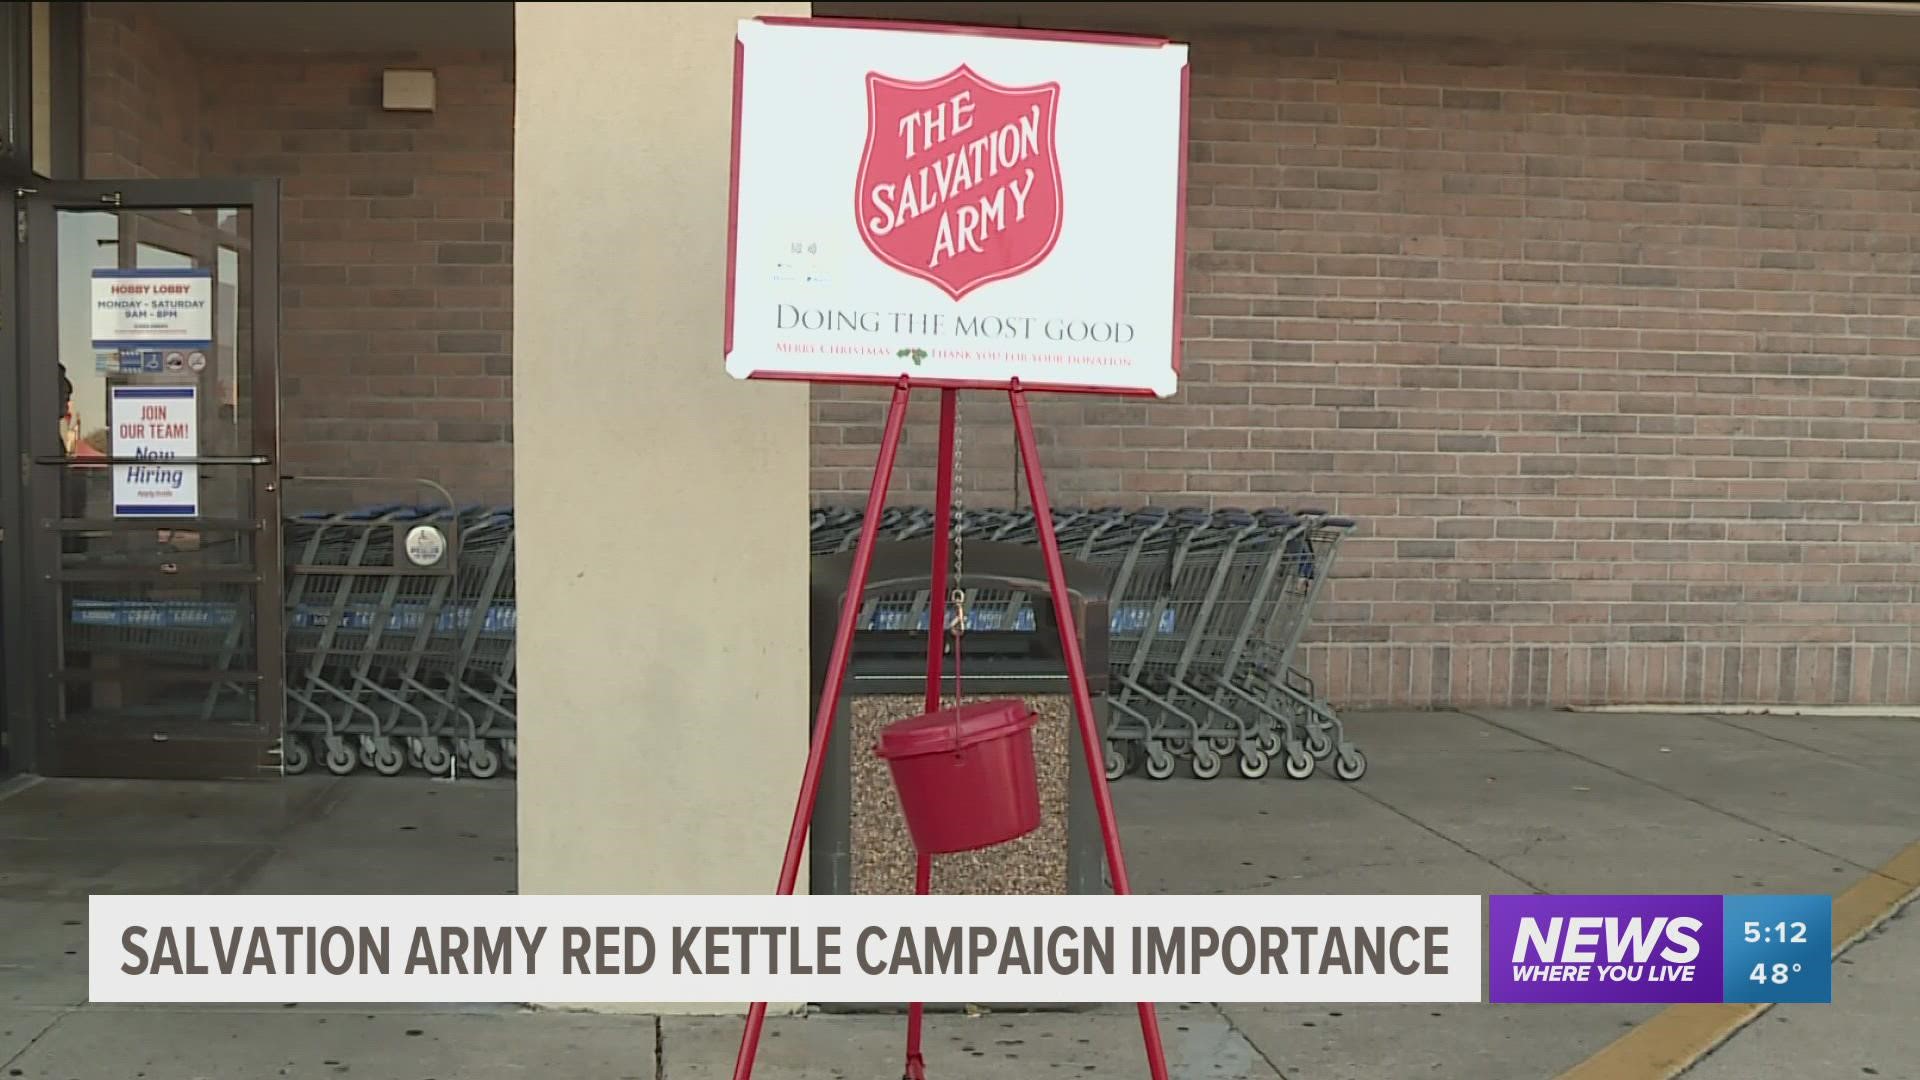 The River Valley Salvation Army is hoping to raise $150,000 this year.